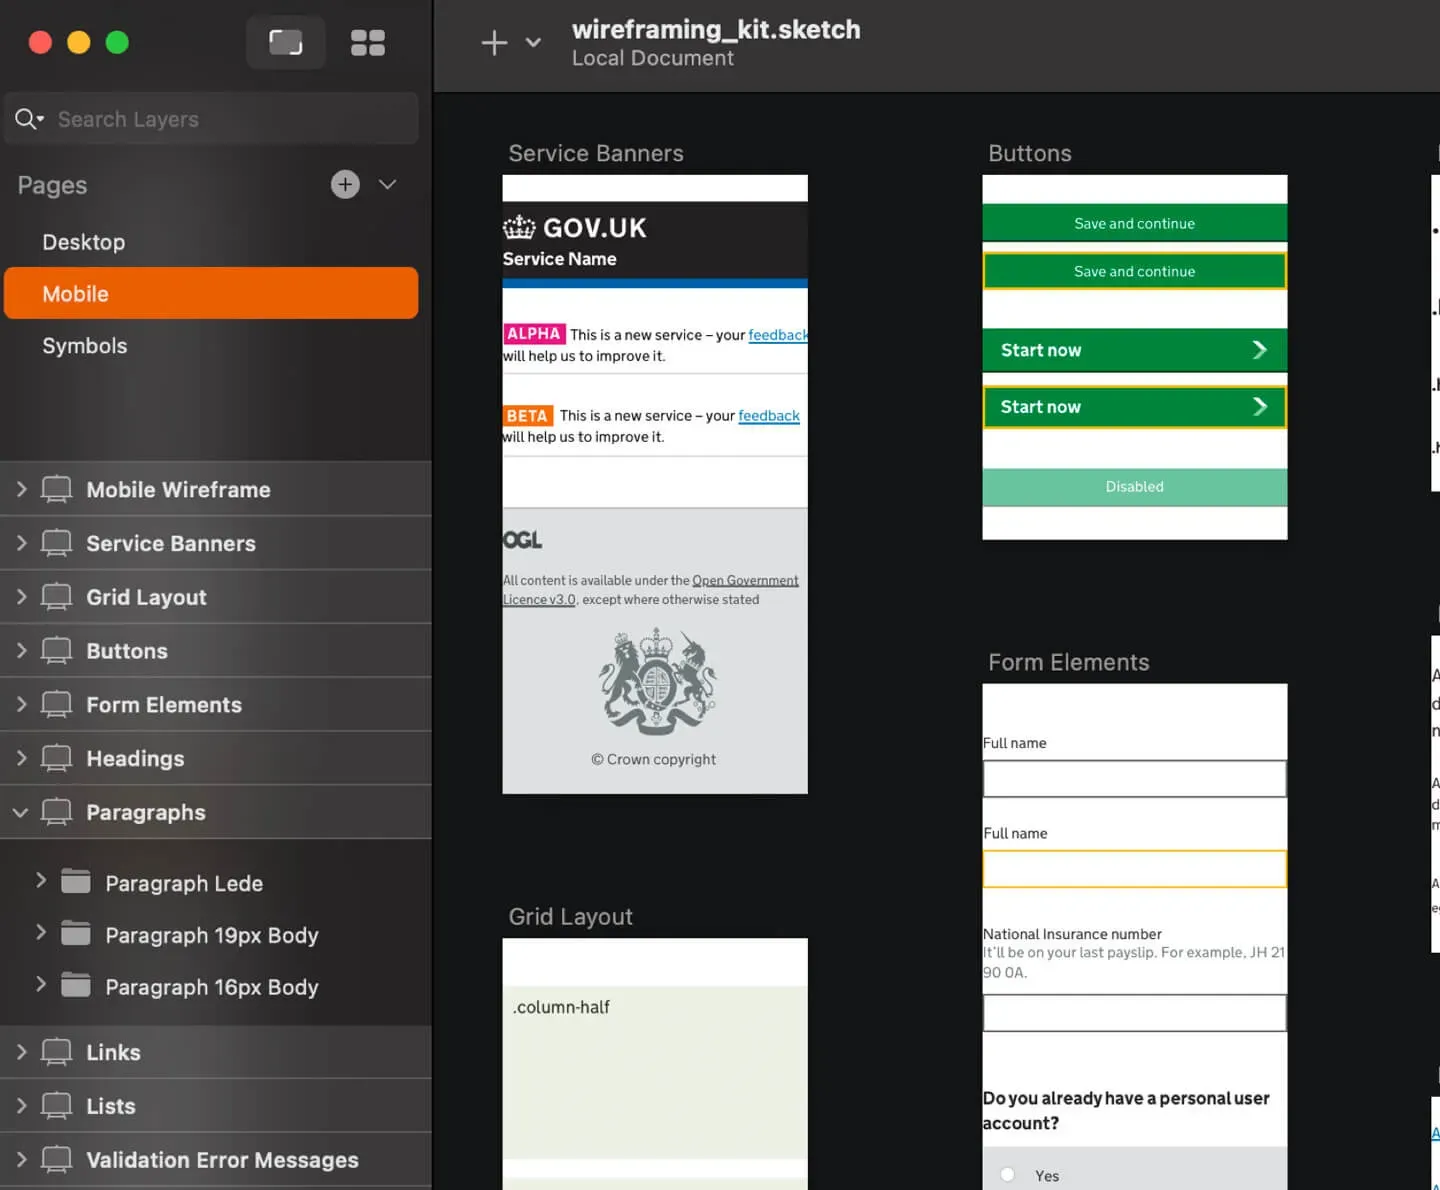 Version 1 of the GOV.UK Wireframing Kit for Sketch. It shows a collection of elements such as inputs and radios. They are scaled for mobile screens.